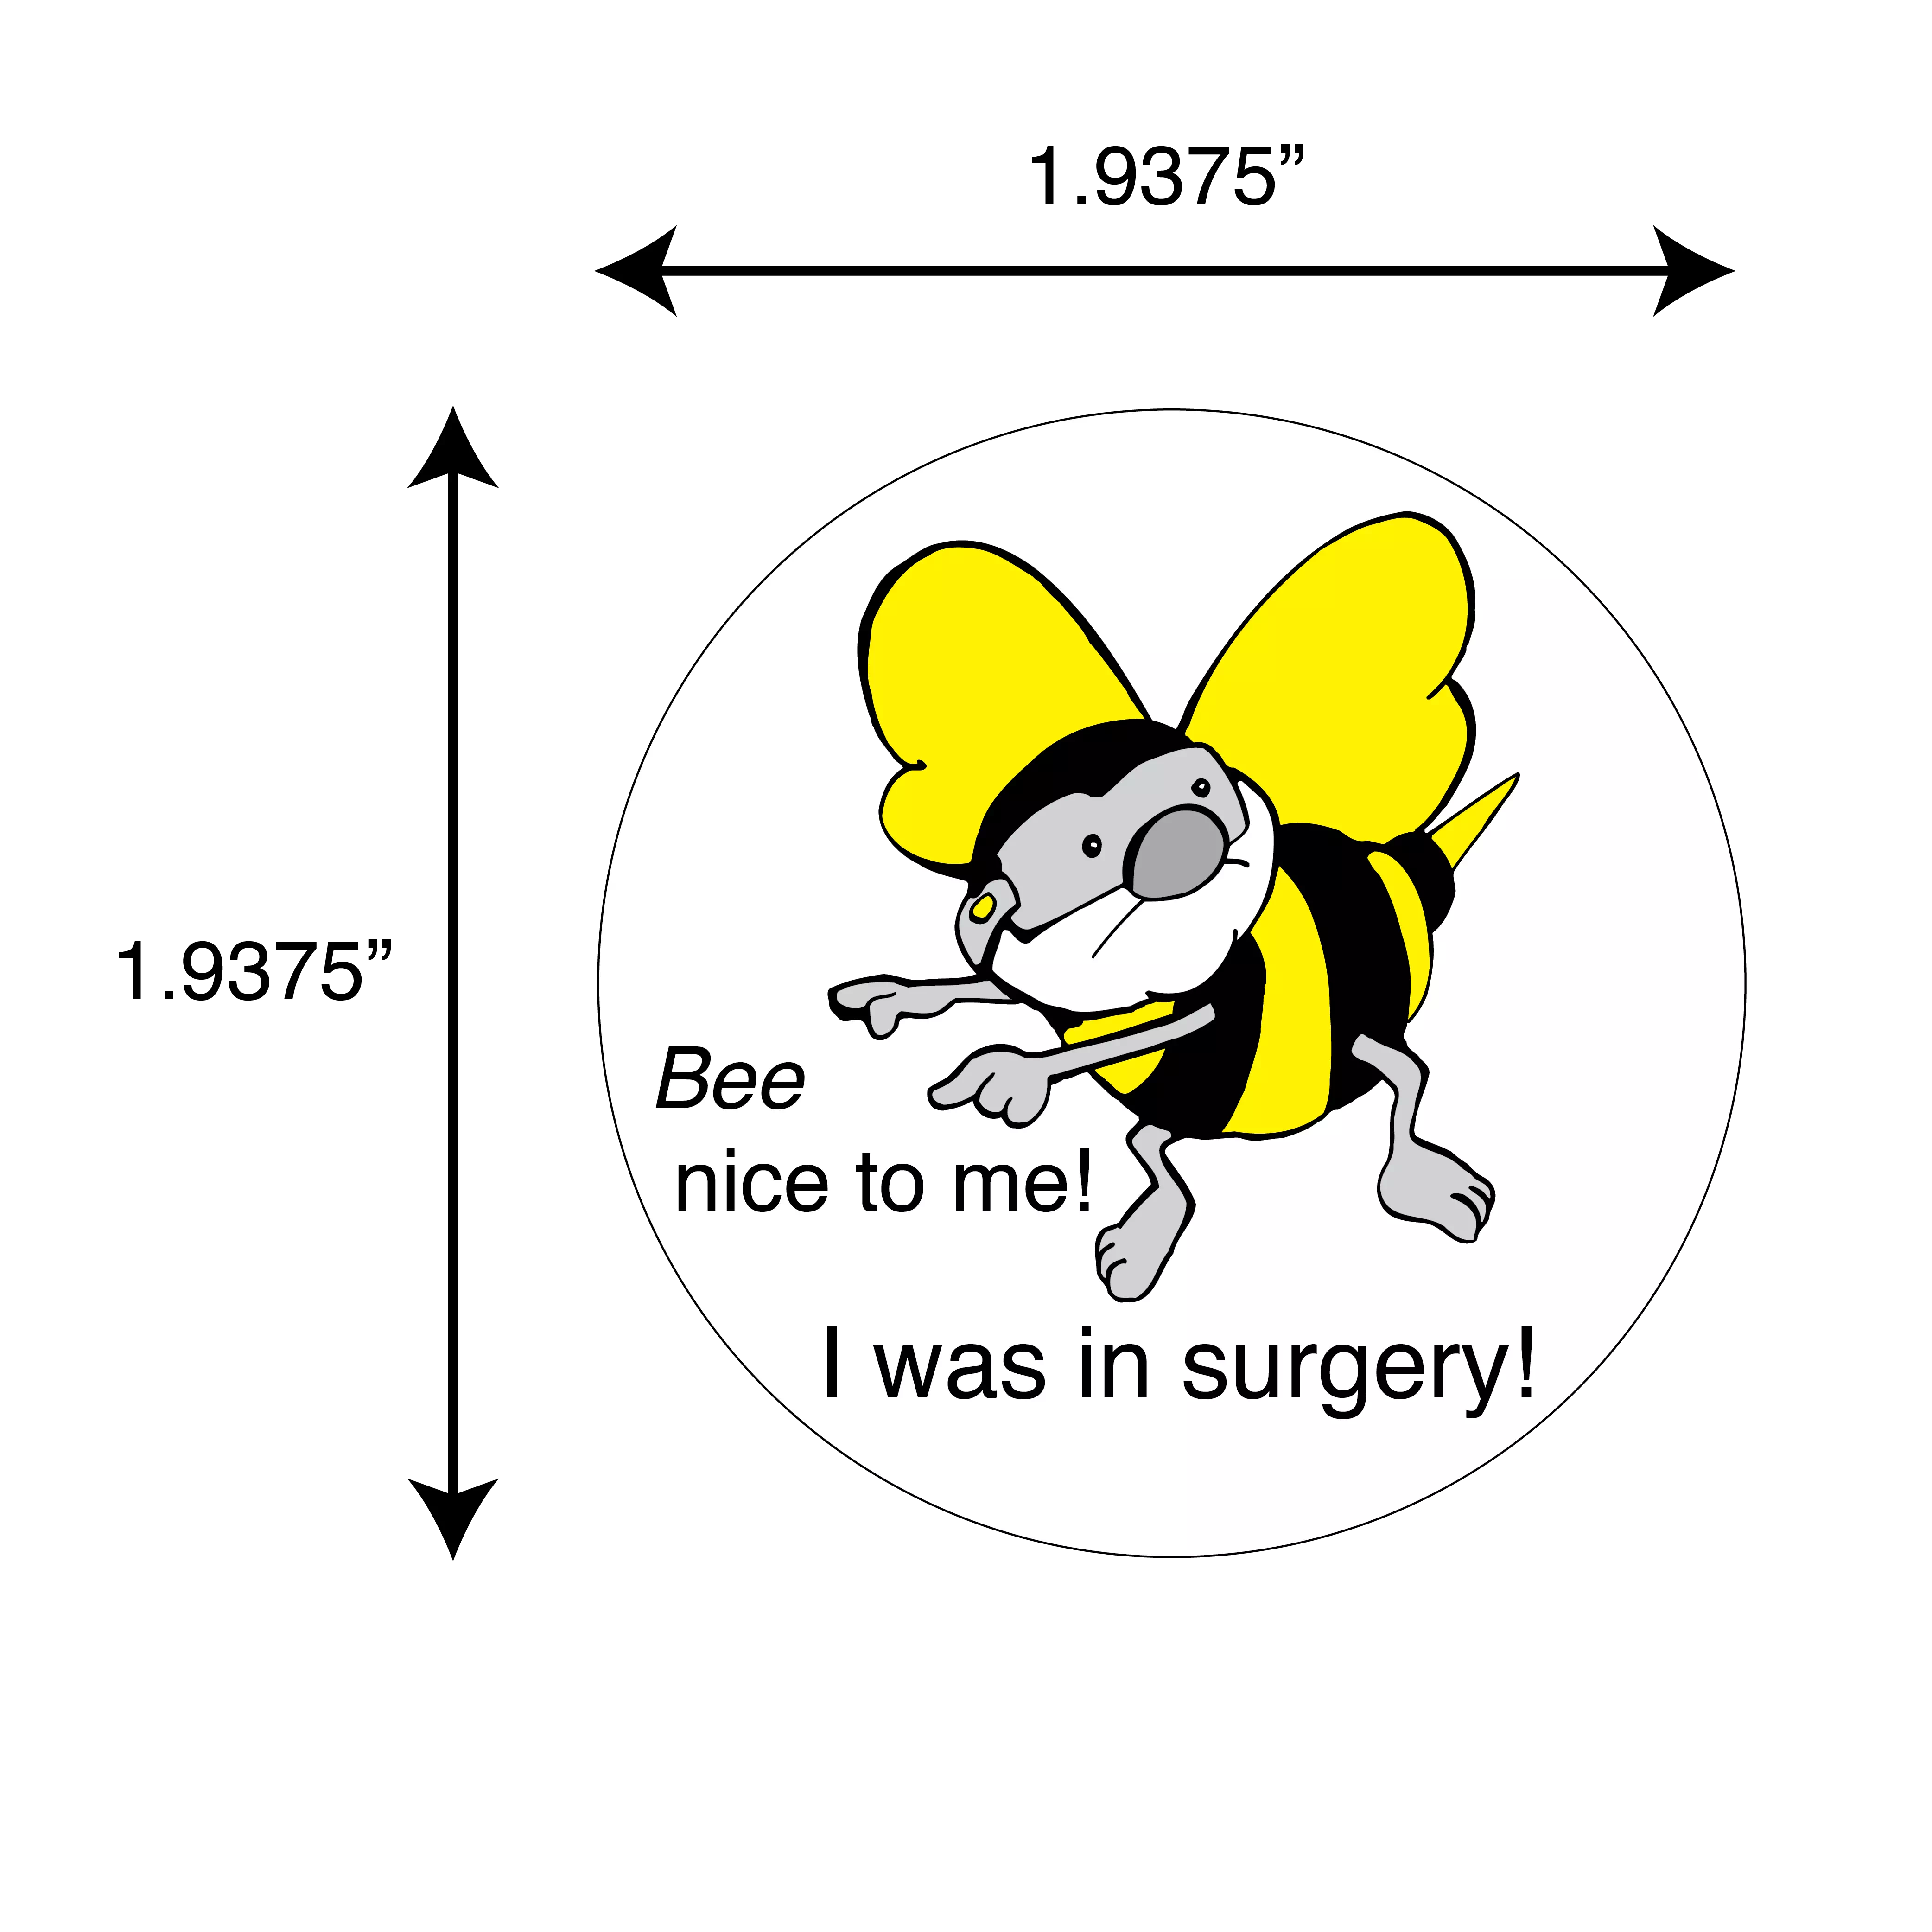 Bee Nice To Me! I Was In Surgery!